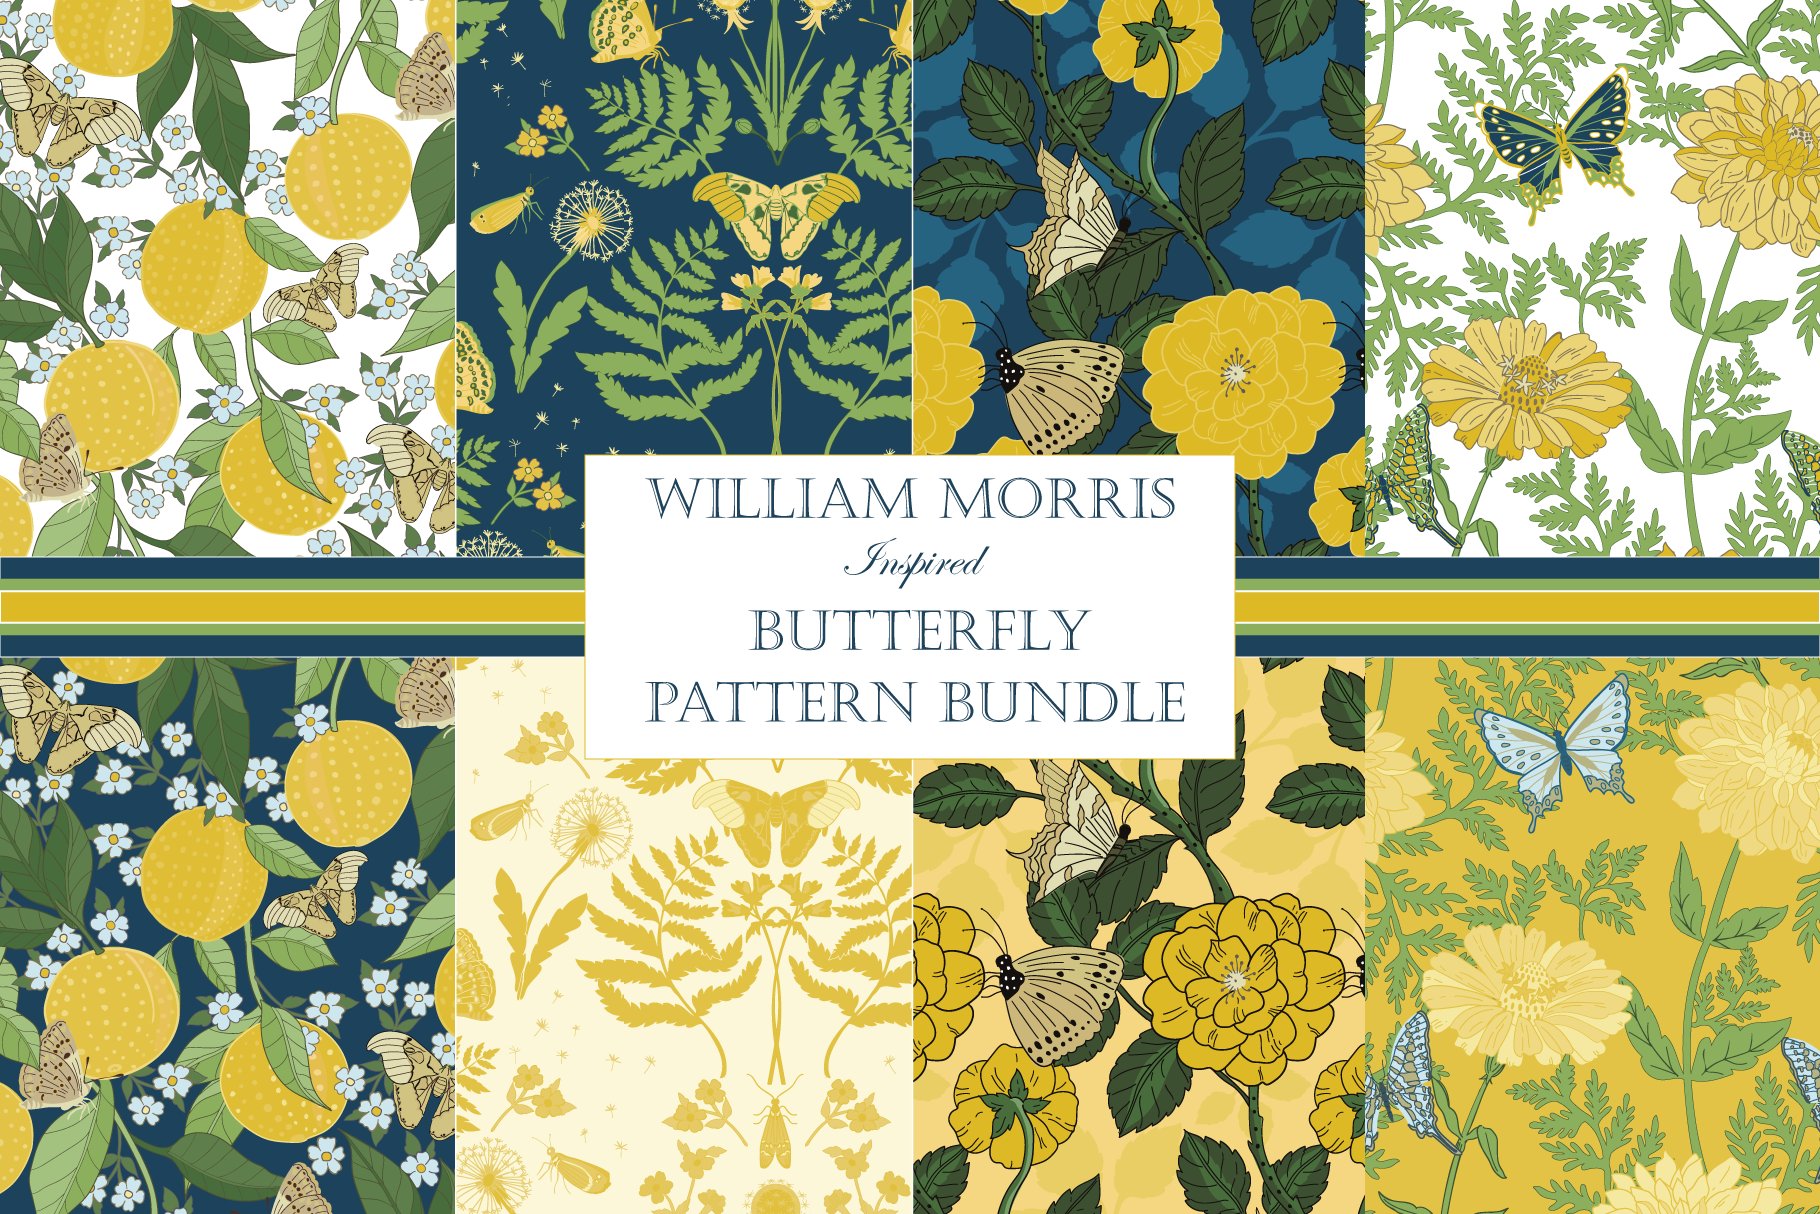 William Morris Butterfly Patterns II cover image.